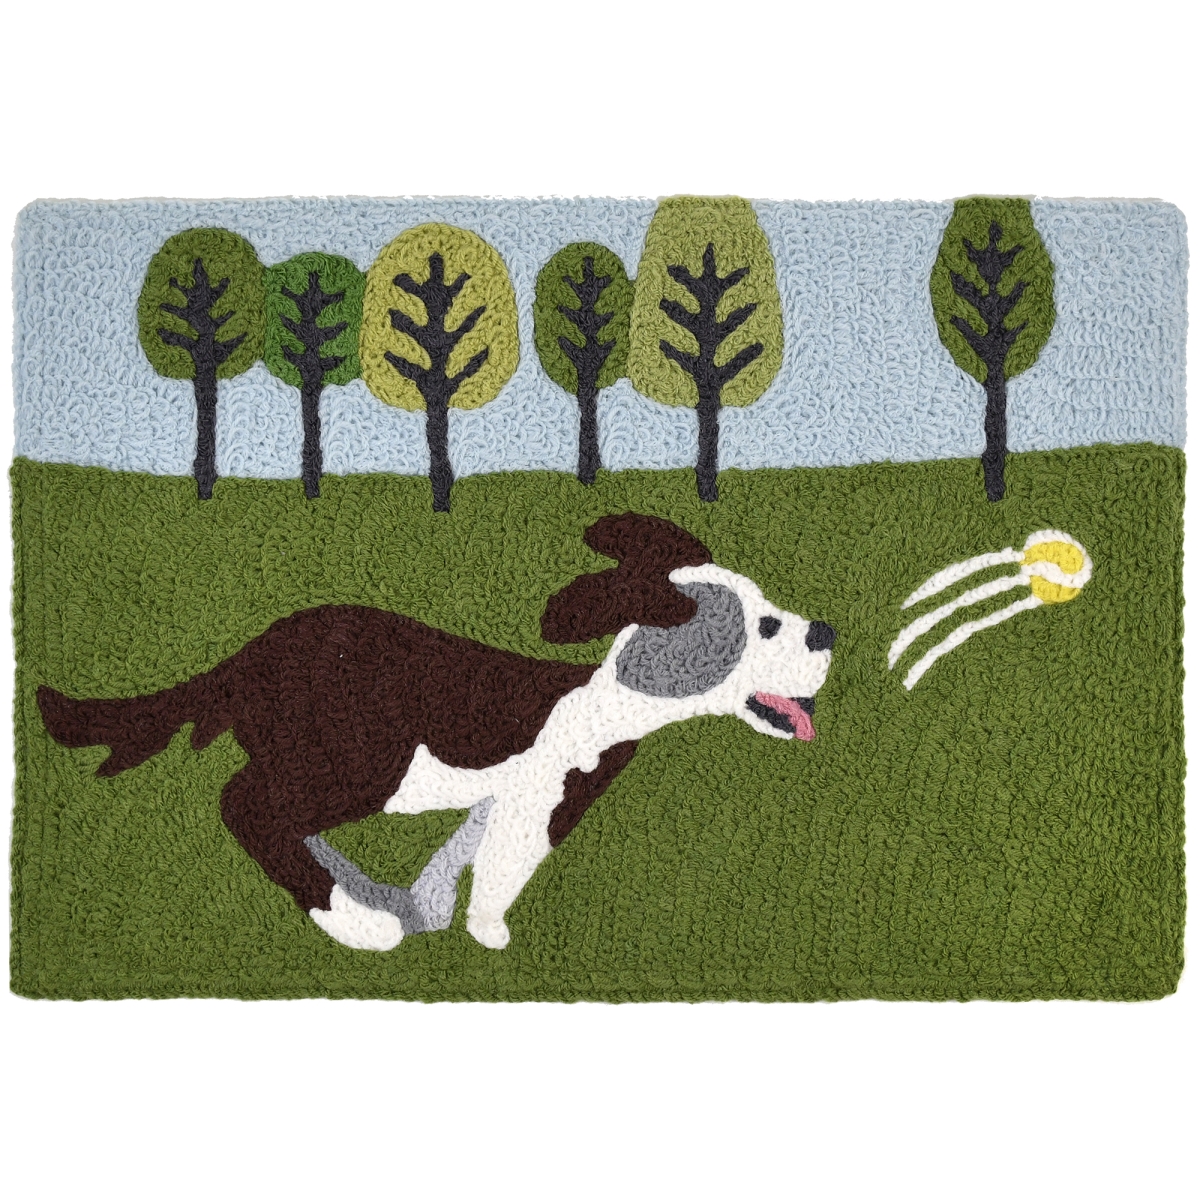 Jb-sfg050 20 X 30 In. Chasing The Ball Indoor & Outdoor Accent Rug